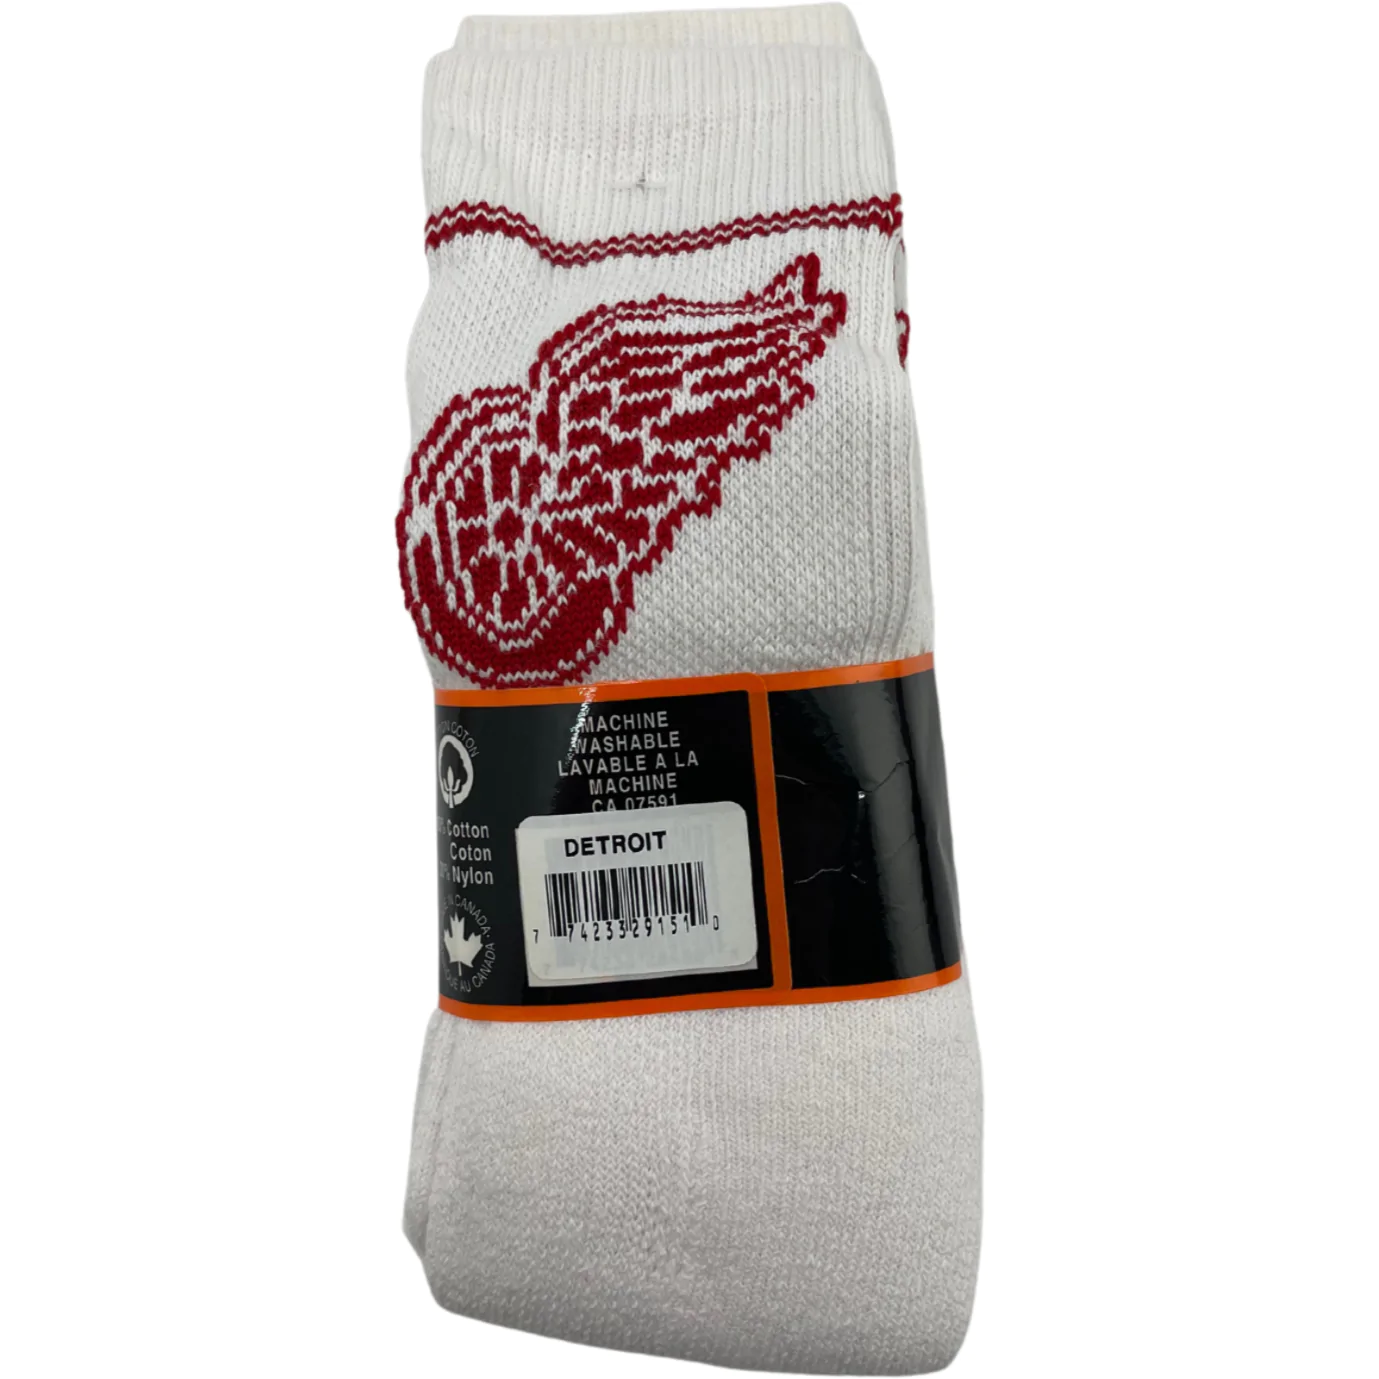 NHL Boy's Sport Socks / Detroit Red Wings / 3 Pack / Size 8-10 / Various Colours